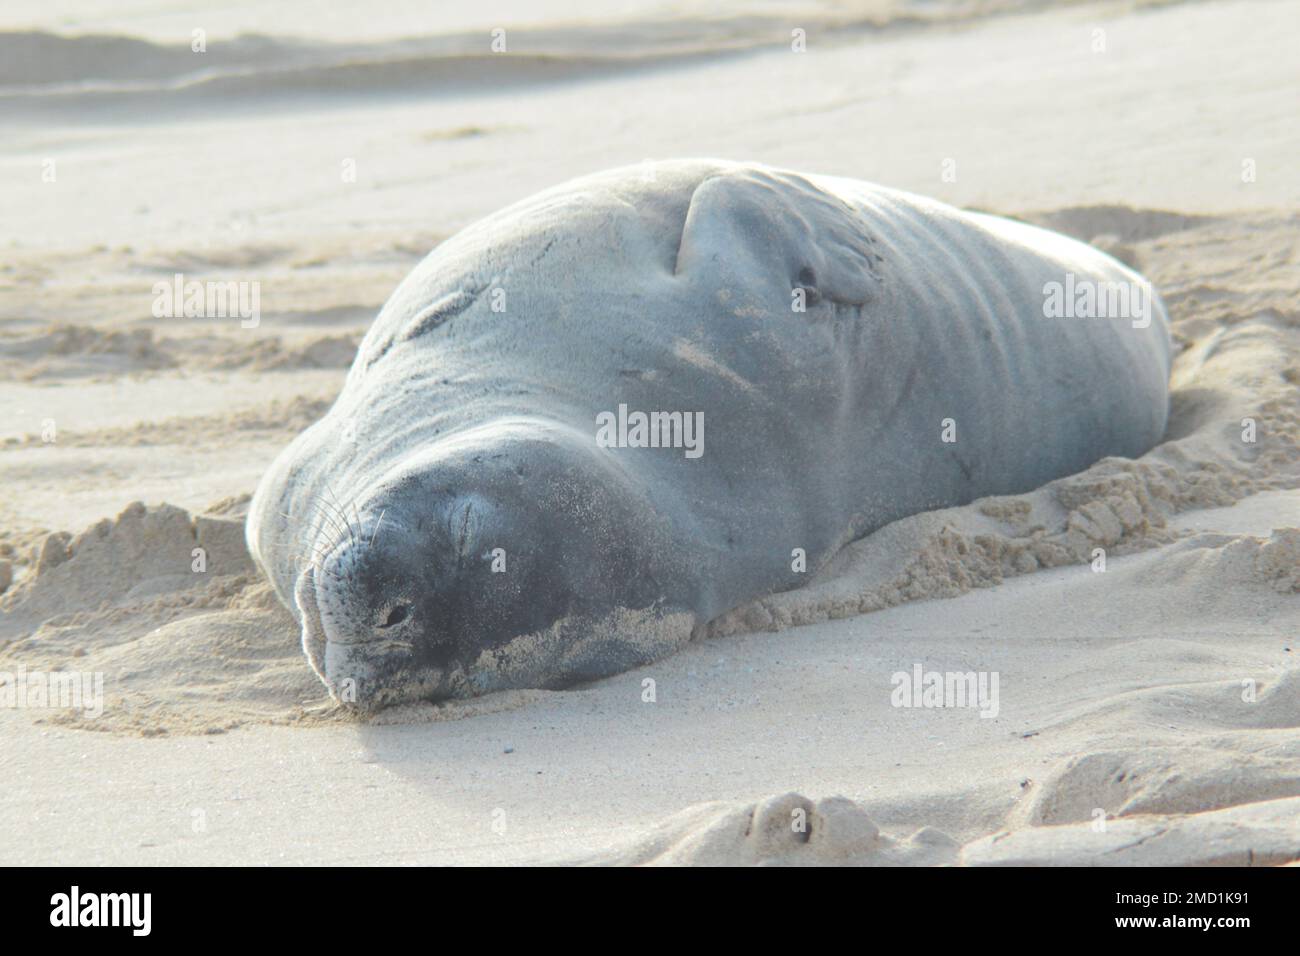 Endangered Hawaiian monk seal with silver grey fur relaxing and sleeping on the beach on Oahu island. Close up Stock Photo